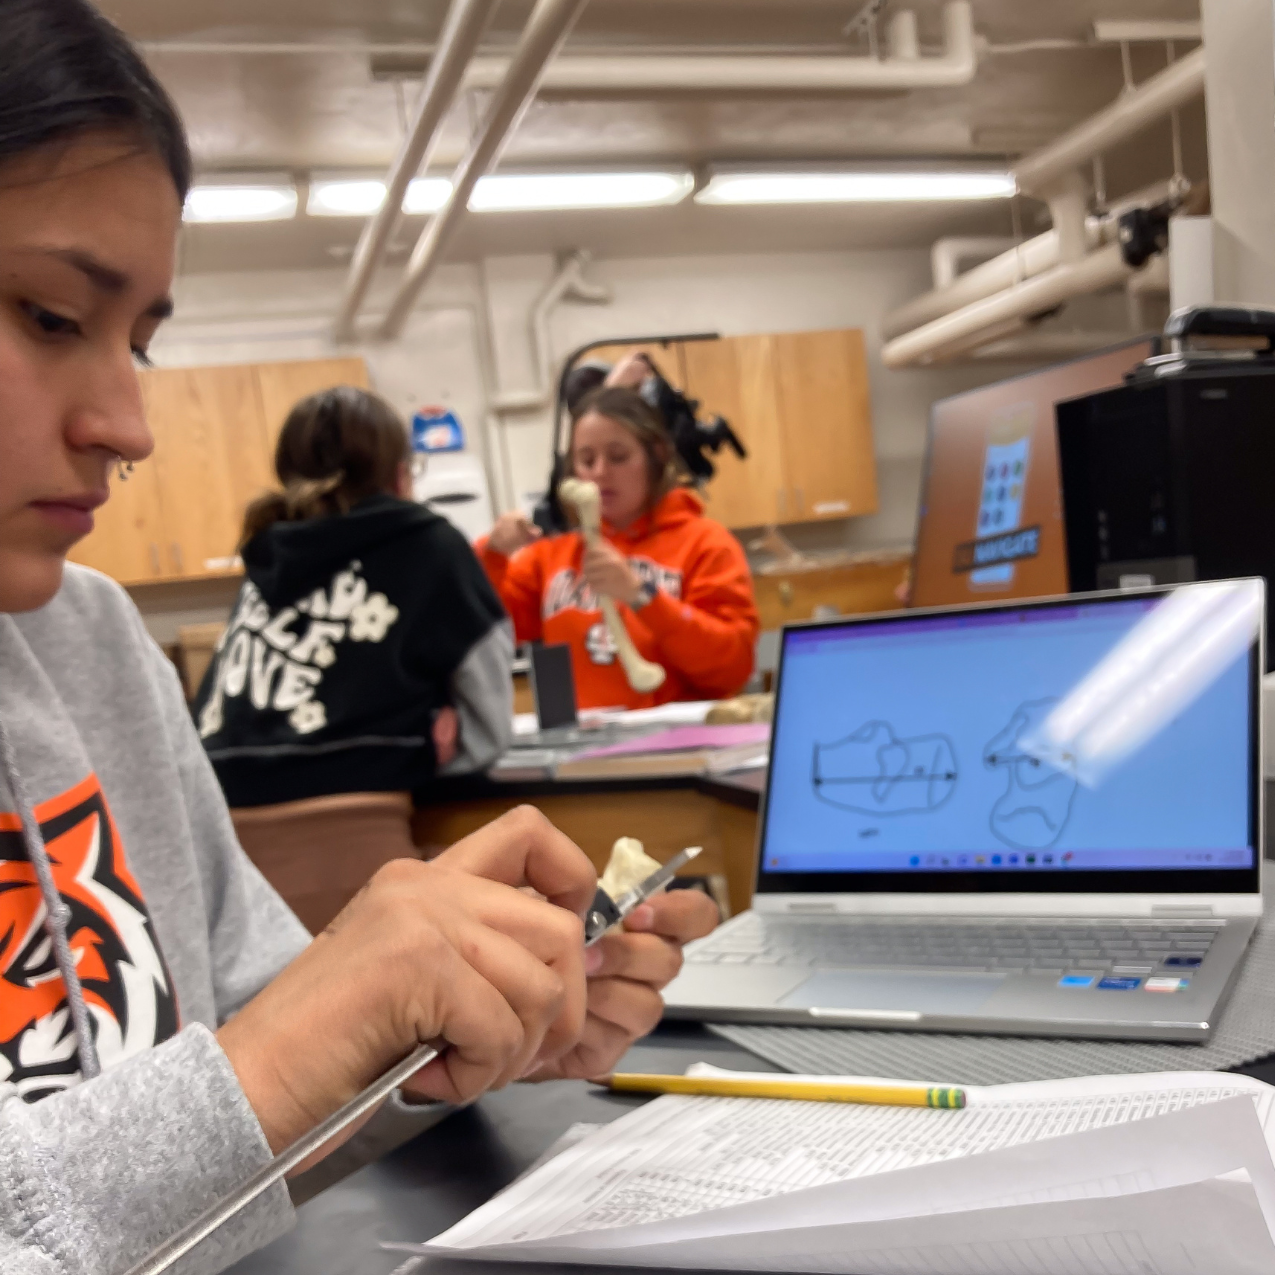 a student measures a bone with a caliper. In the background her laptop shows a sketch of a bone. Students in the background work together at another table.